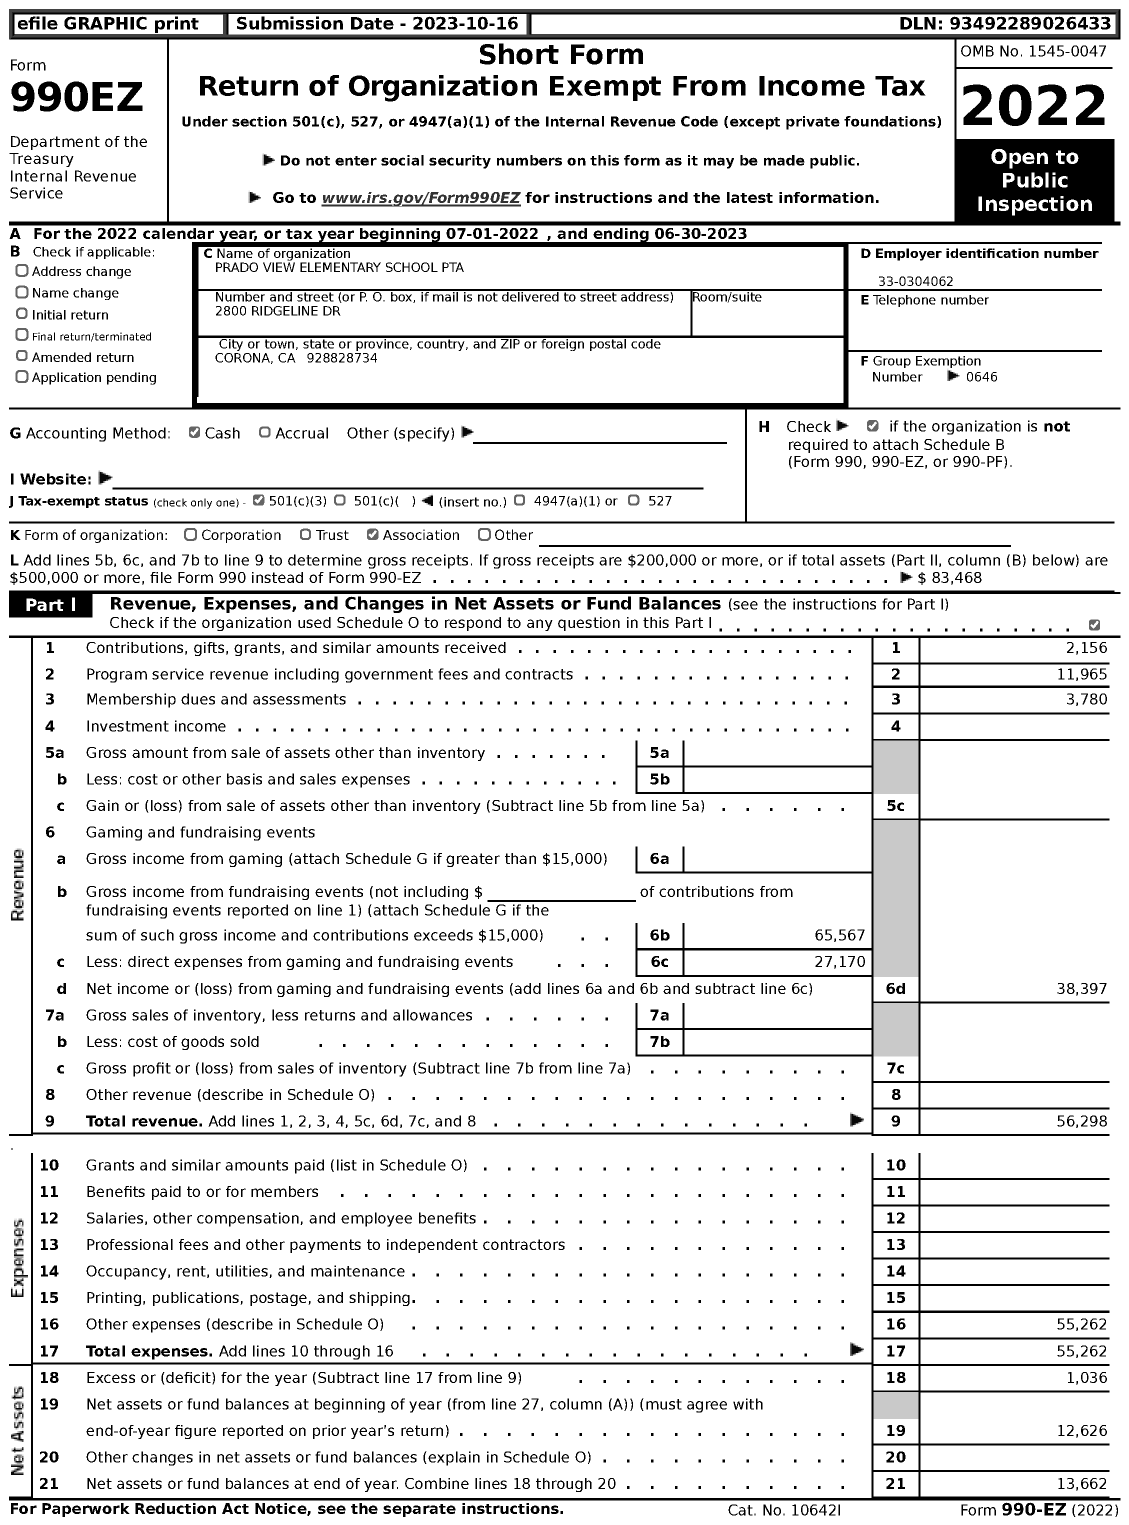 Image of first page of 2022 Form 990EZ for California State PTA - Prado View Elementary PTA